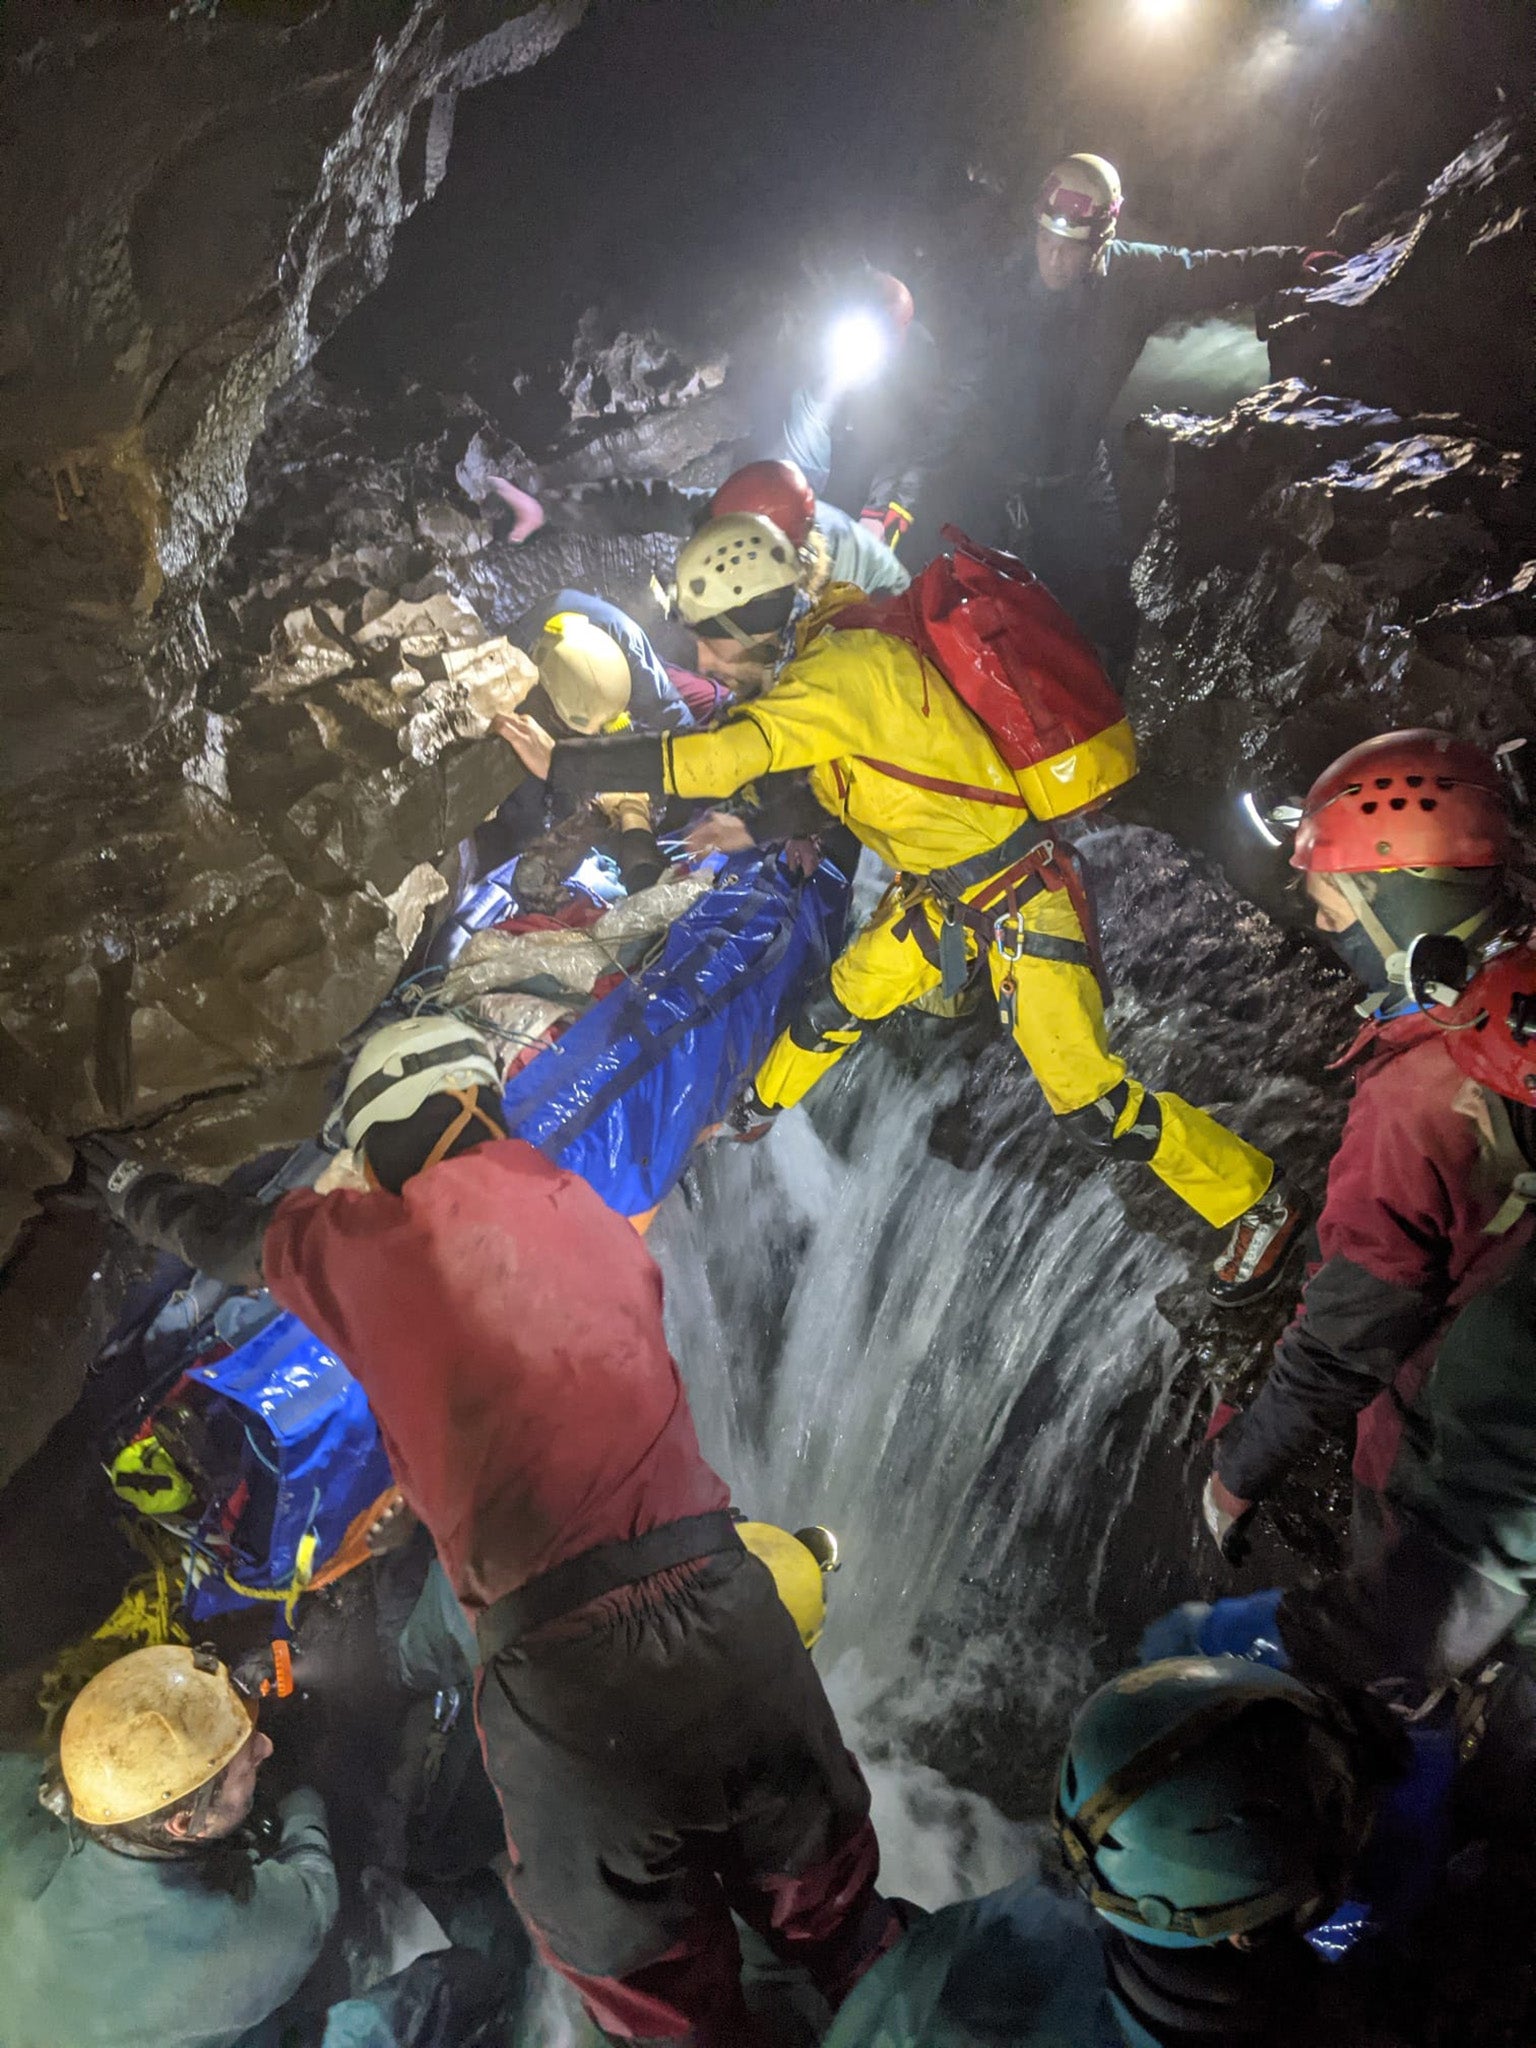 Rescuers carried stretcher for hours at a time in precipitous conditions